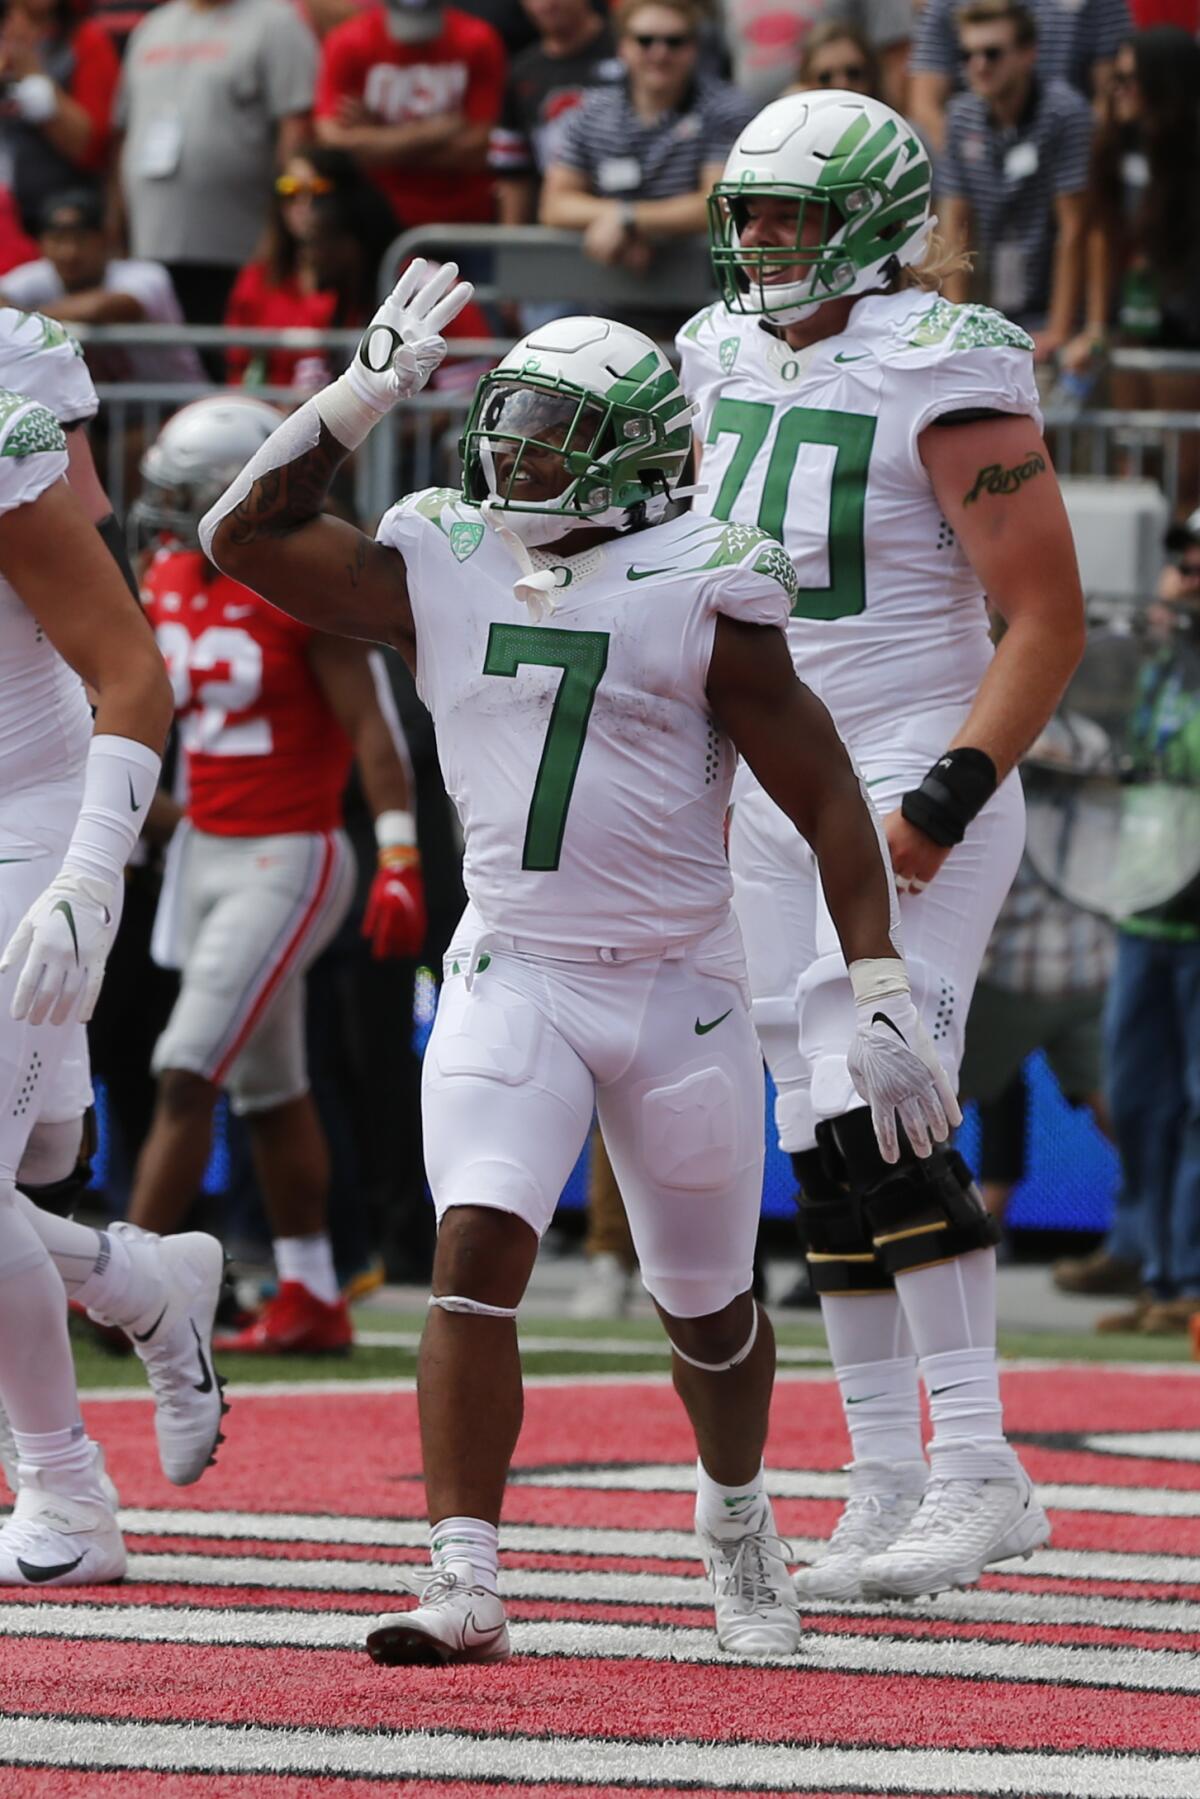 Oregon running back CJ Verdell celebrates his touchdown against Ohio State during the first half of an NCAA college football game Saturday, Sept. 11, 2021, in Columbus, Ohio. (AP Photo/Jay LaPrete)